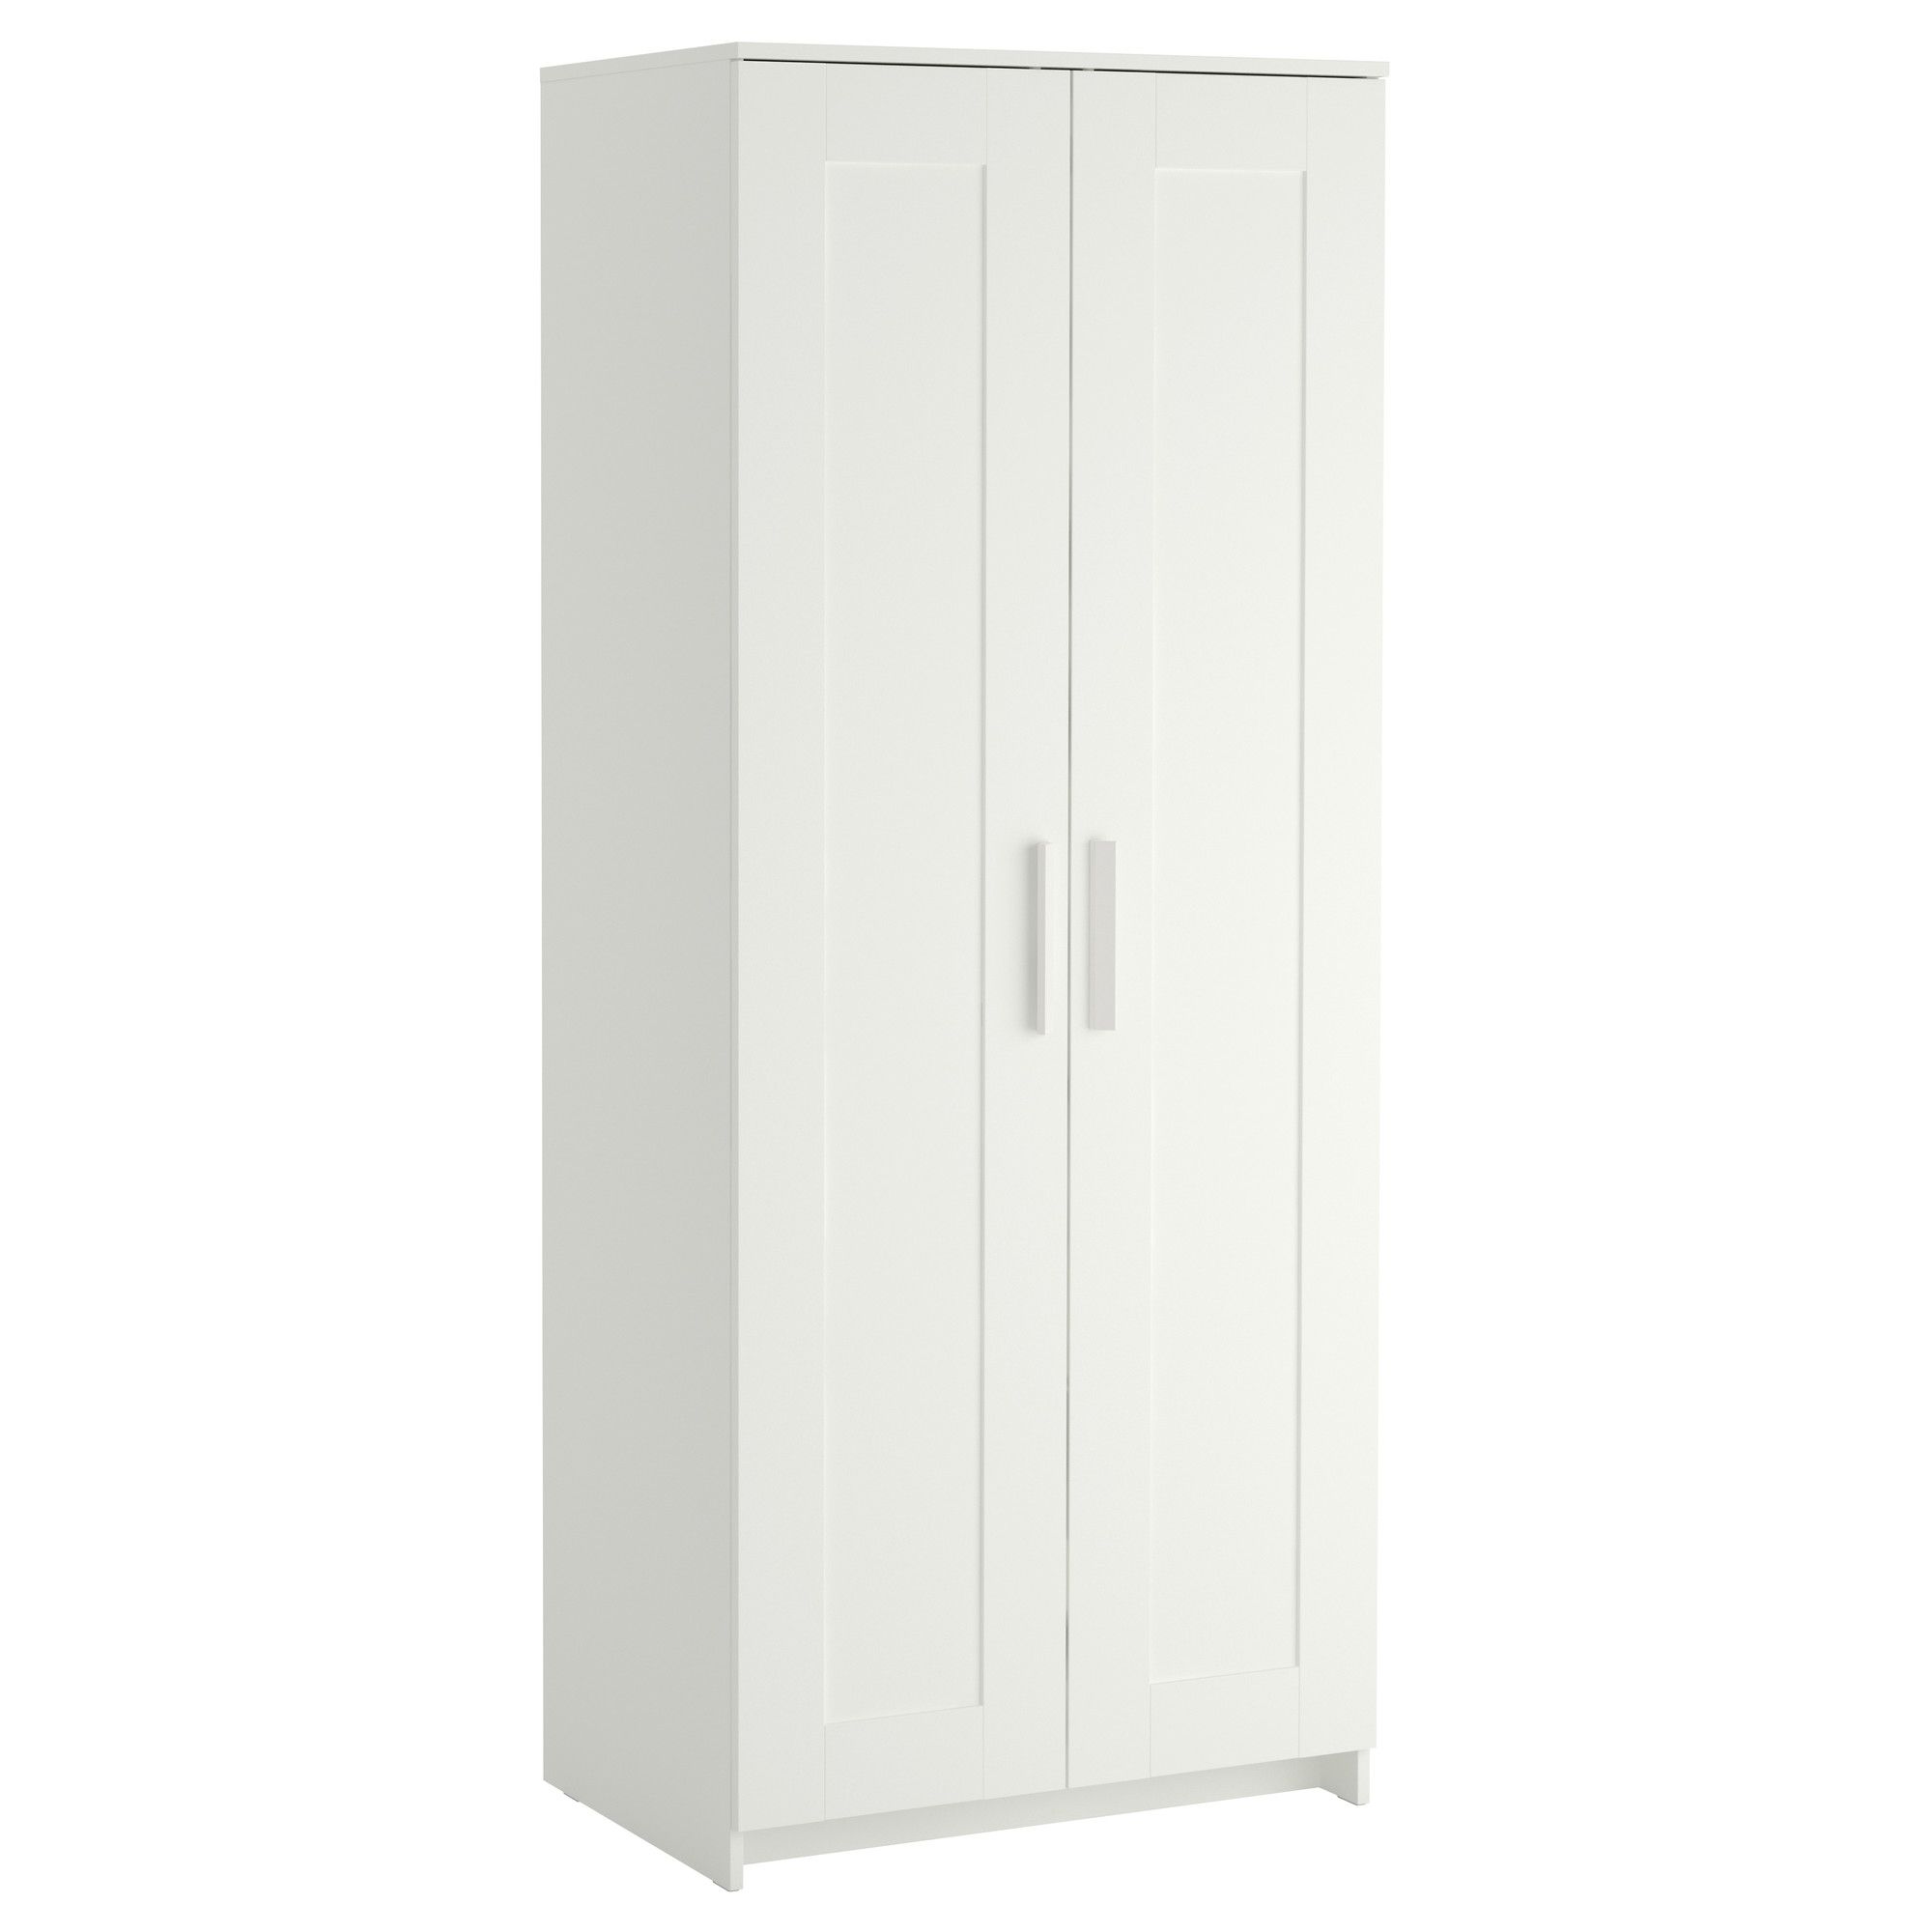 Most Recently Released Two Door White Wardrobes Throughout Brimnes Wardrobe With 2 Doors White 78x190 Cm – Ikea (View 5 of 15)